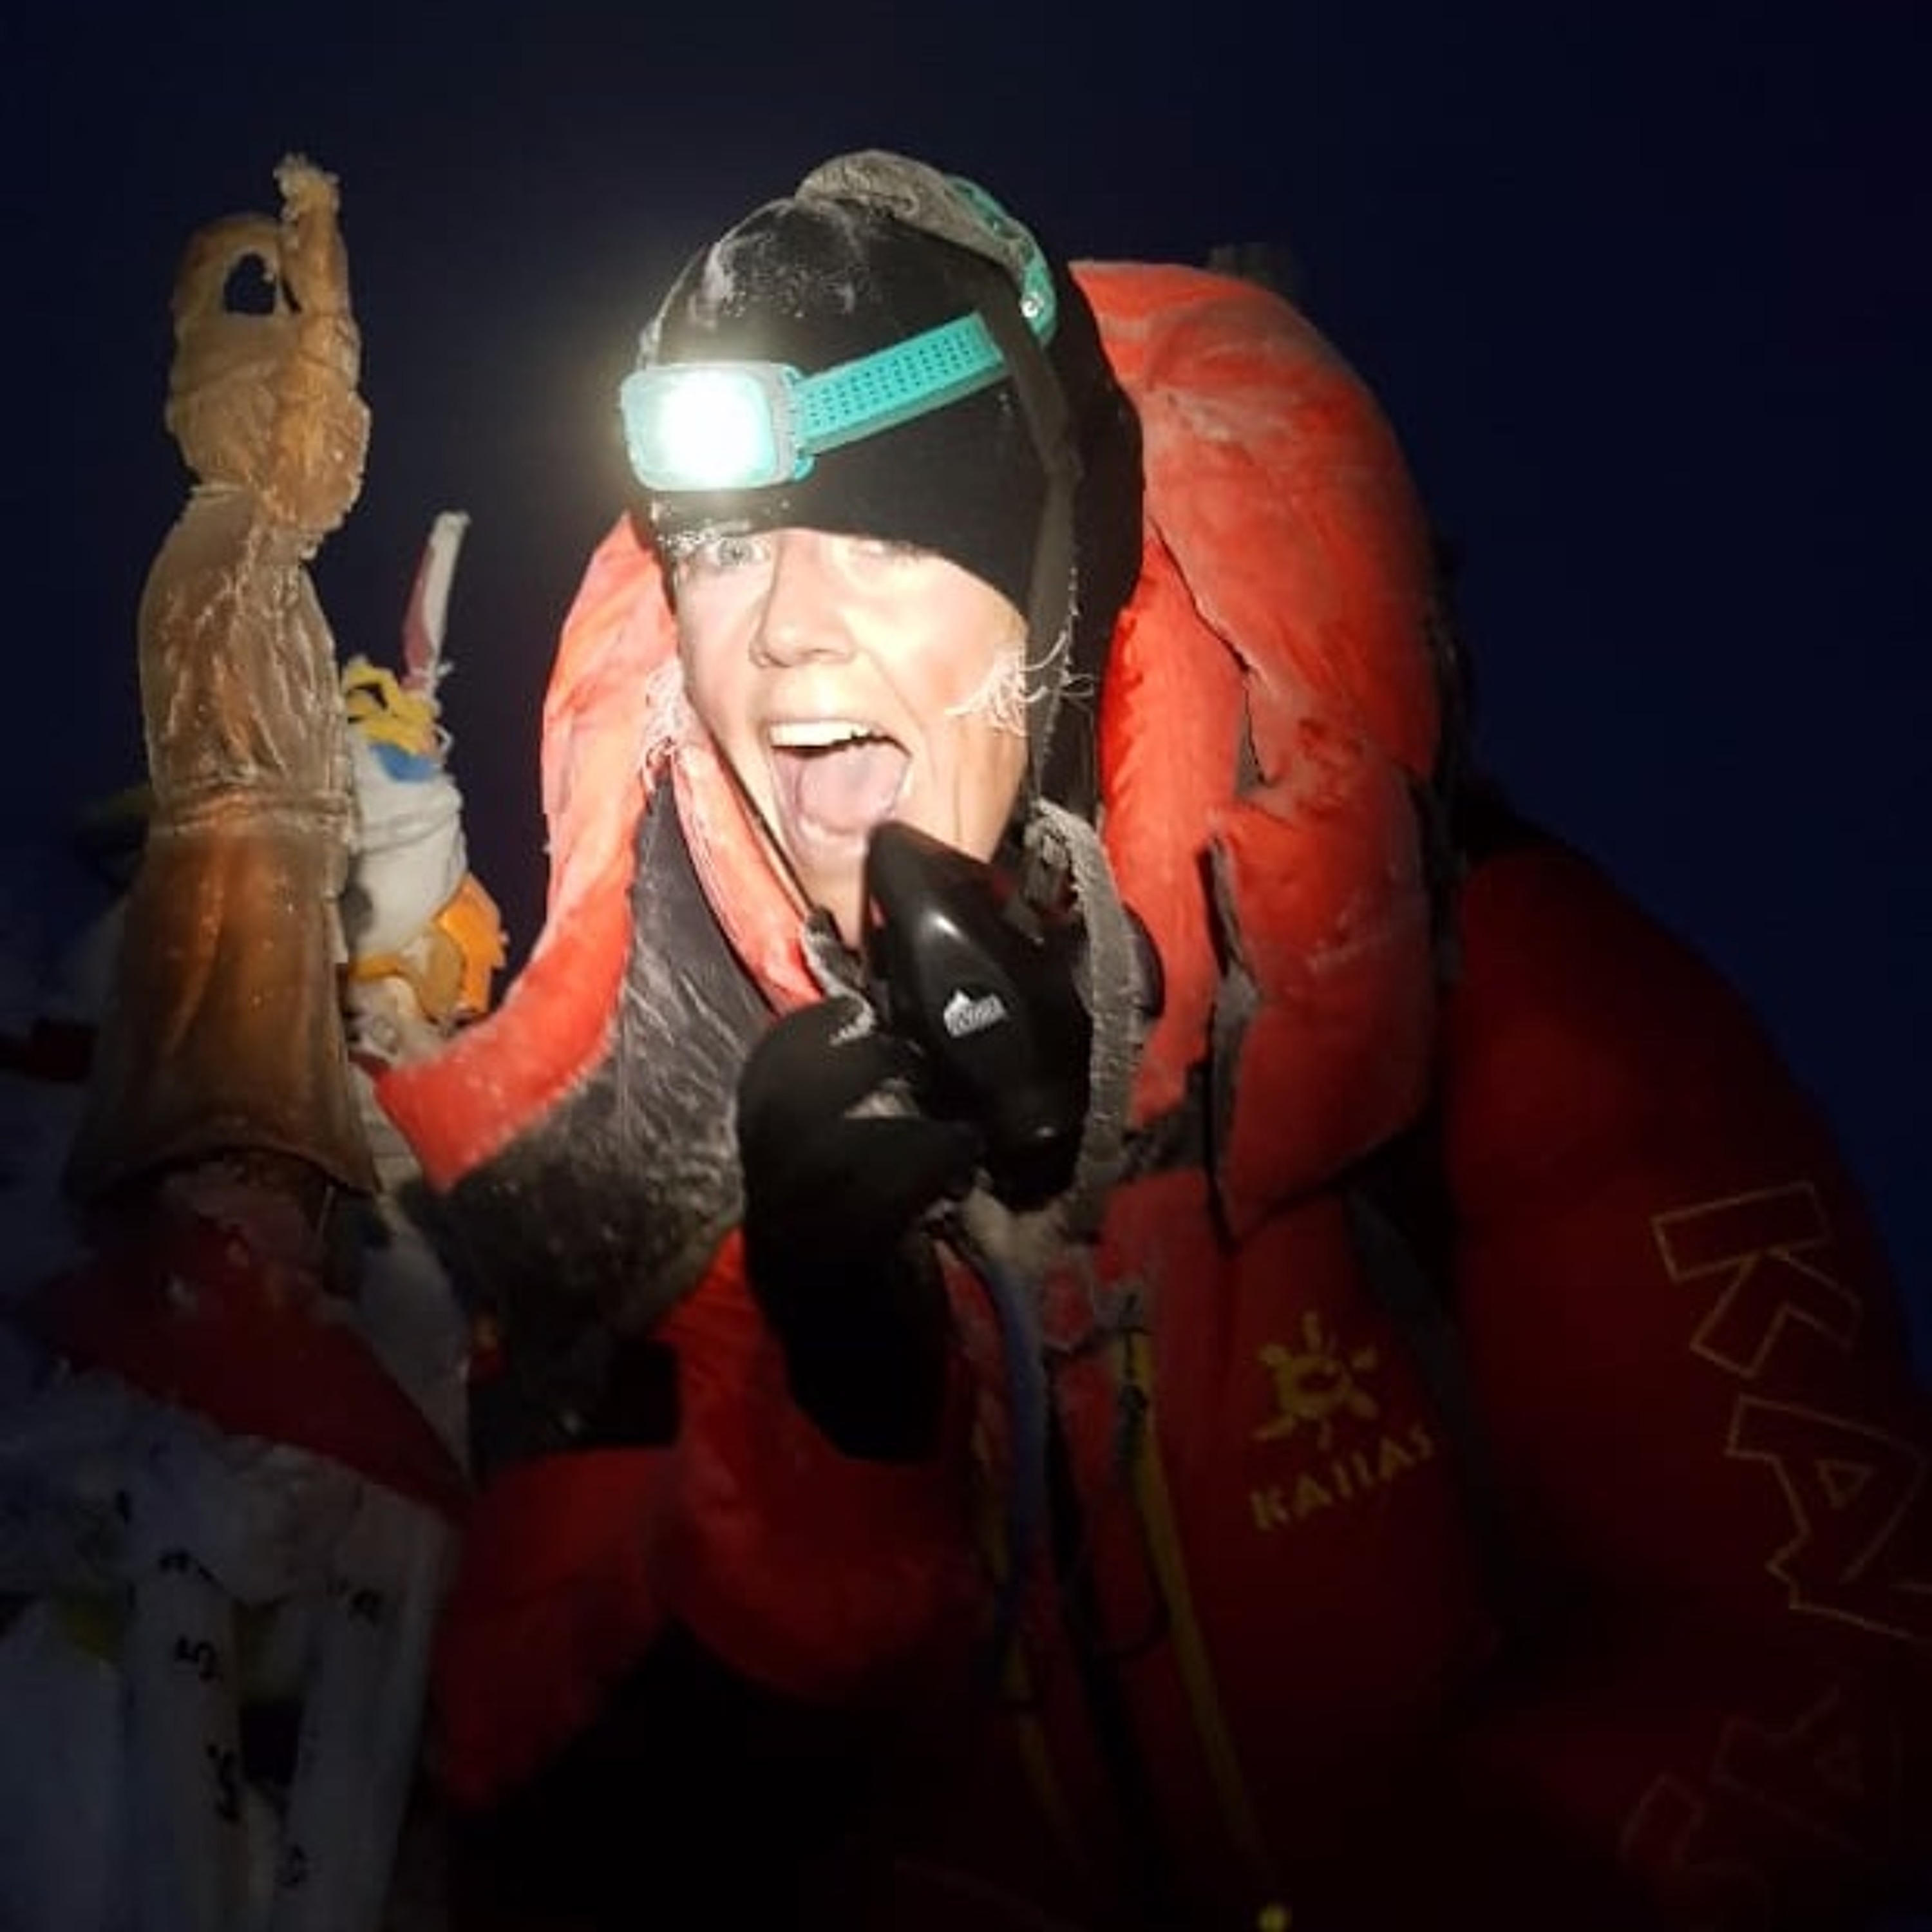 30A Show: Local Woman Summits Mount Everest